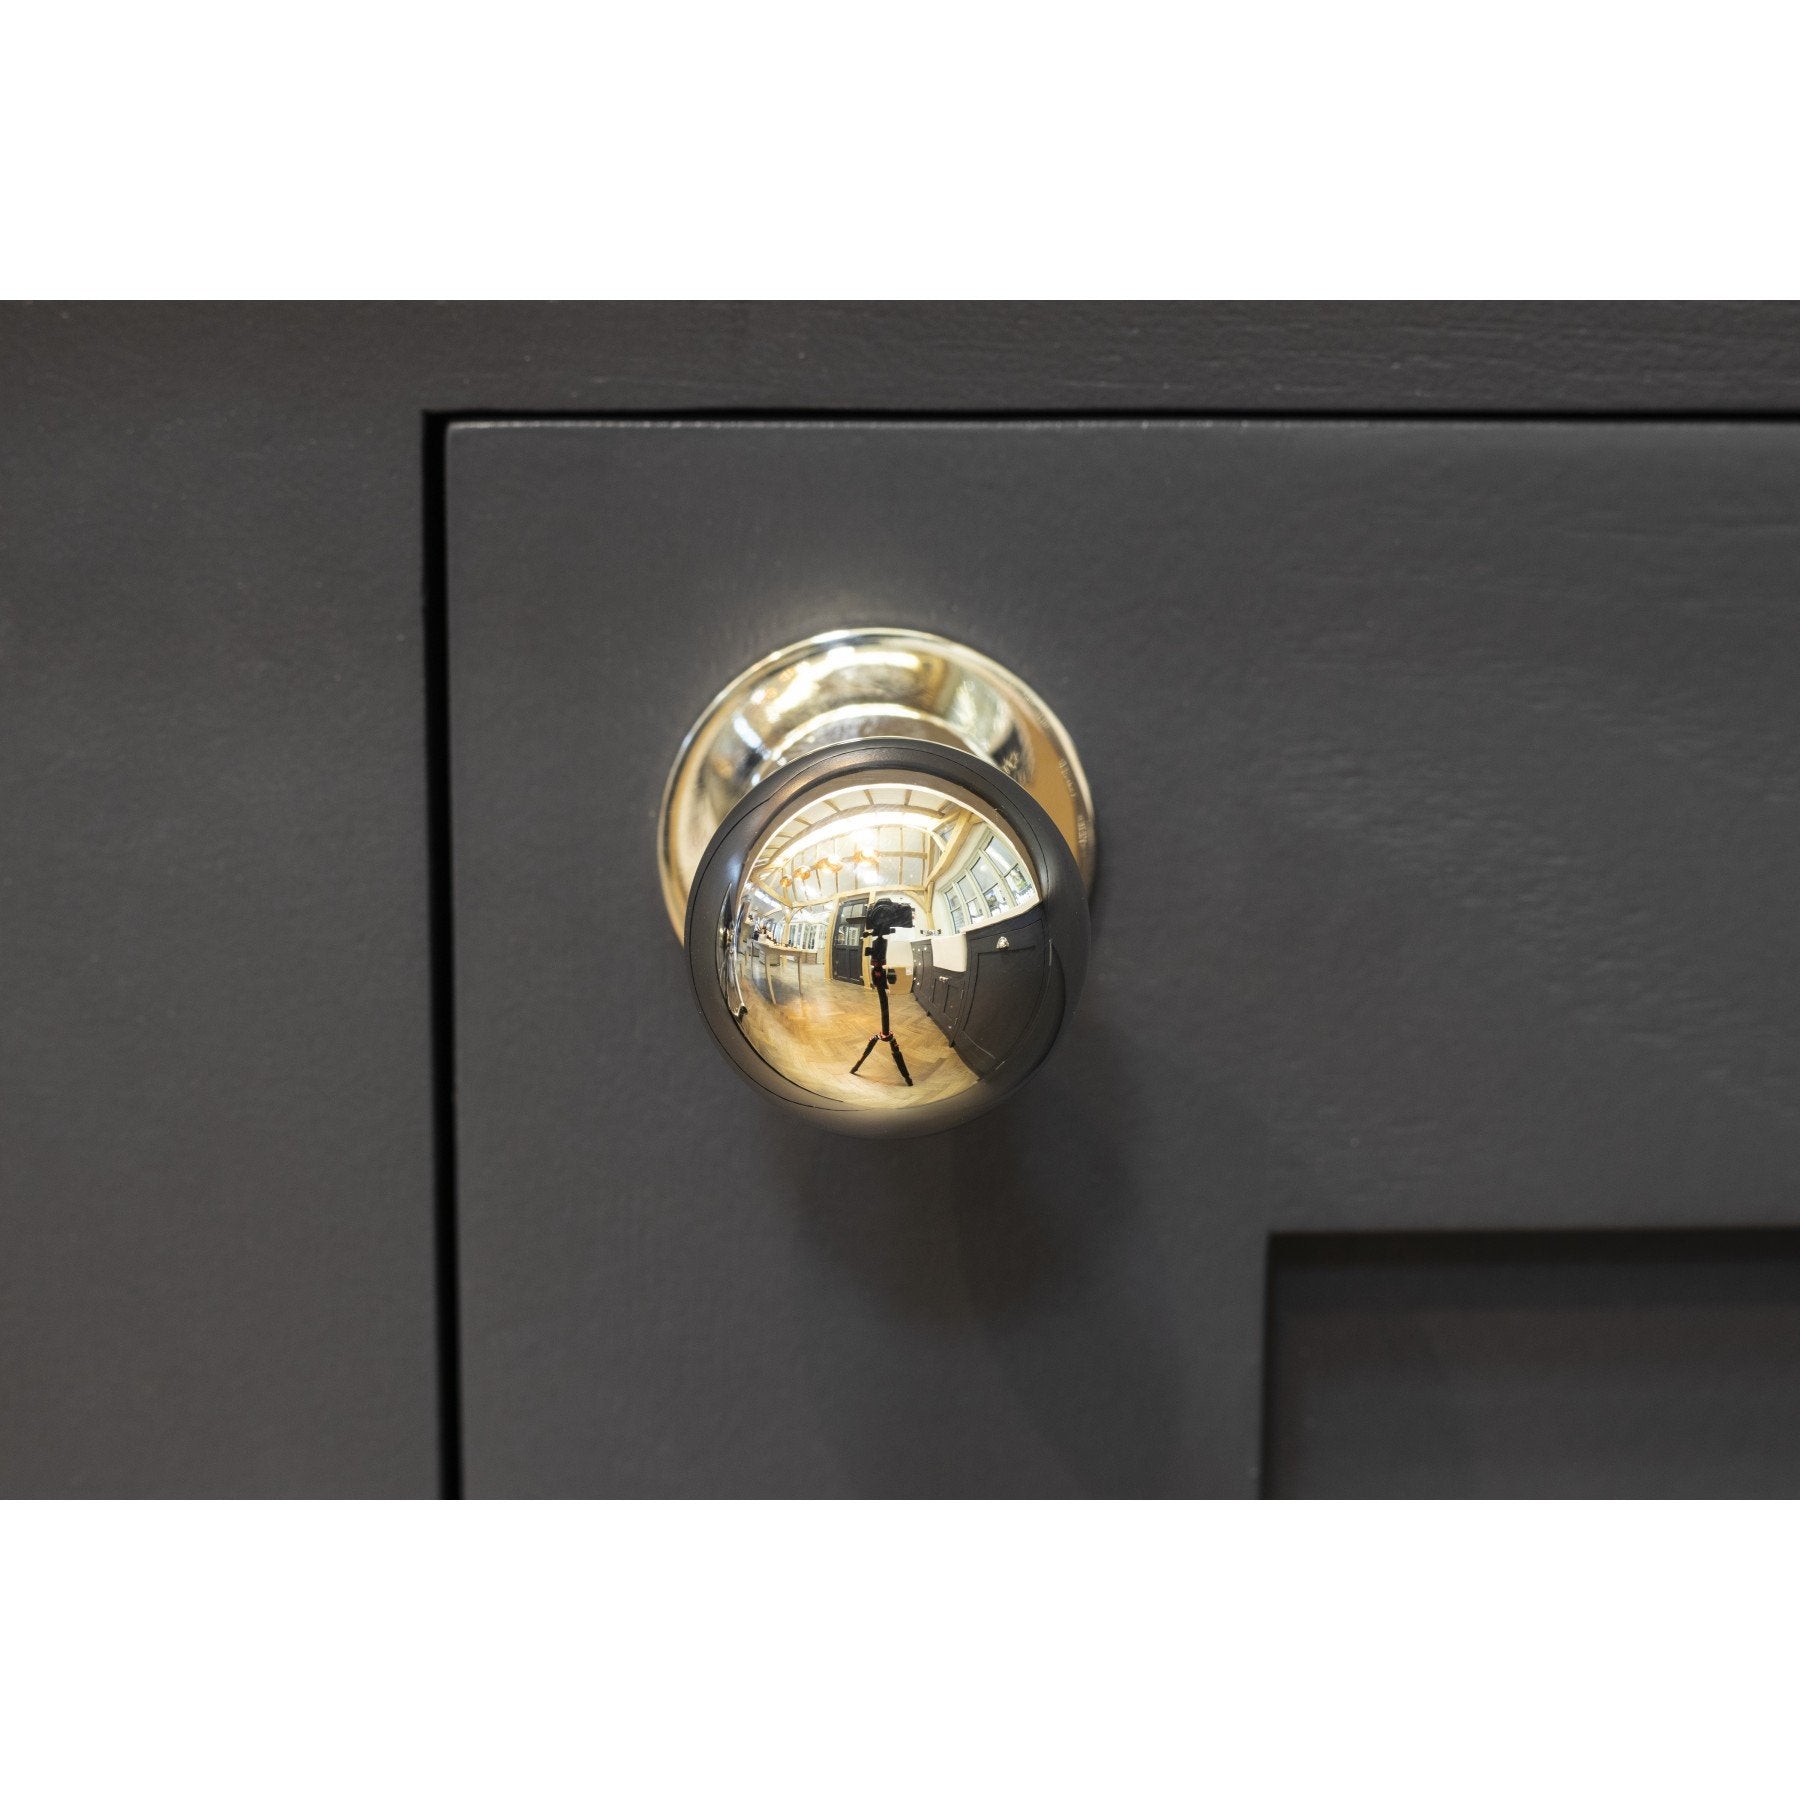 From the Anvil Polished Nickel Ball Cabinet Knob - Small